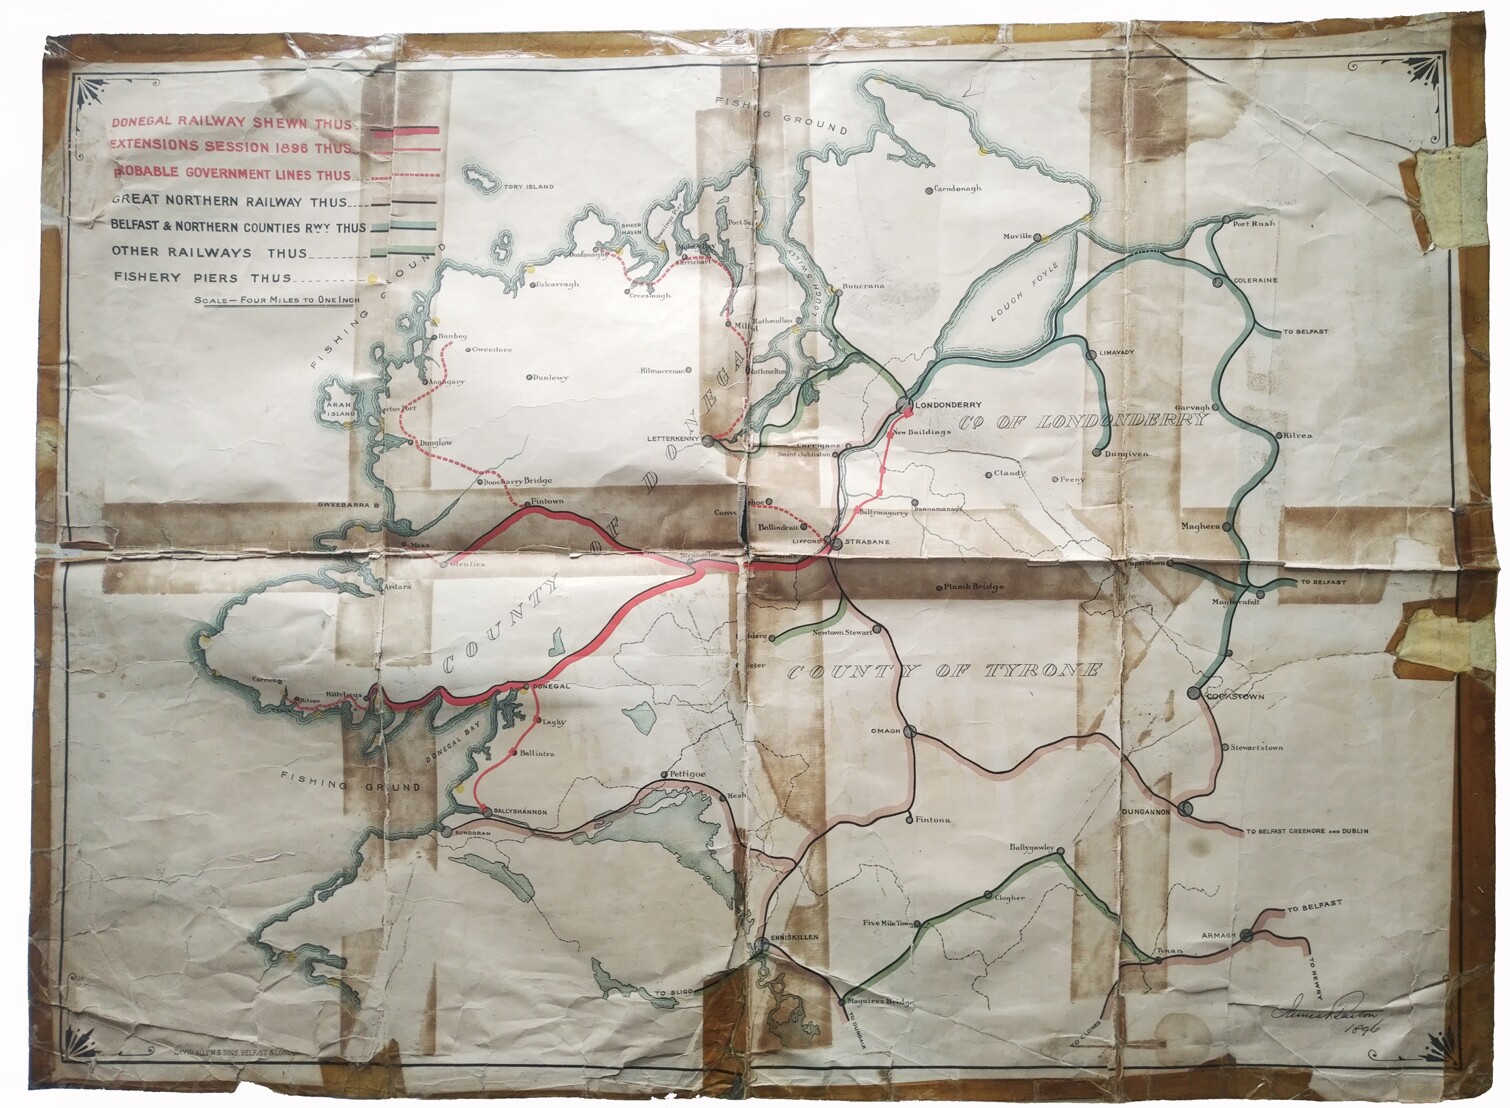 Donegal Railway Map, 1896 (Donegal Railway Heritage Center, Heike Thiele CC BY-NC-SA)